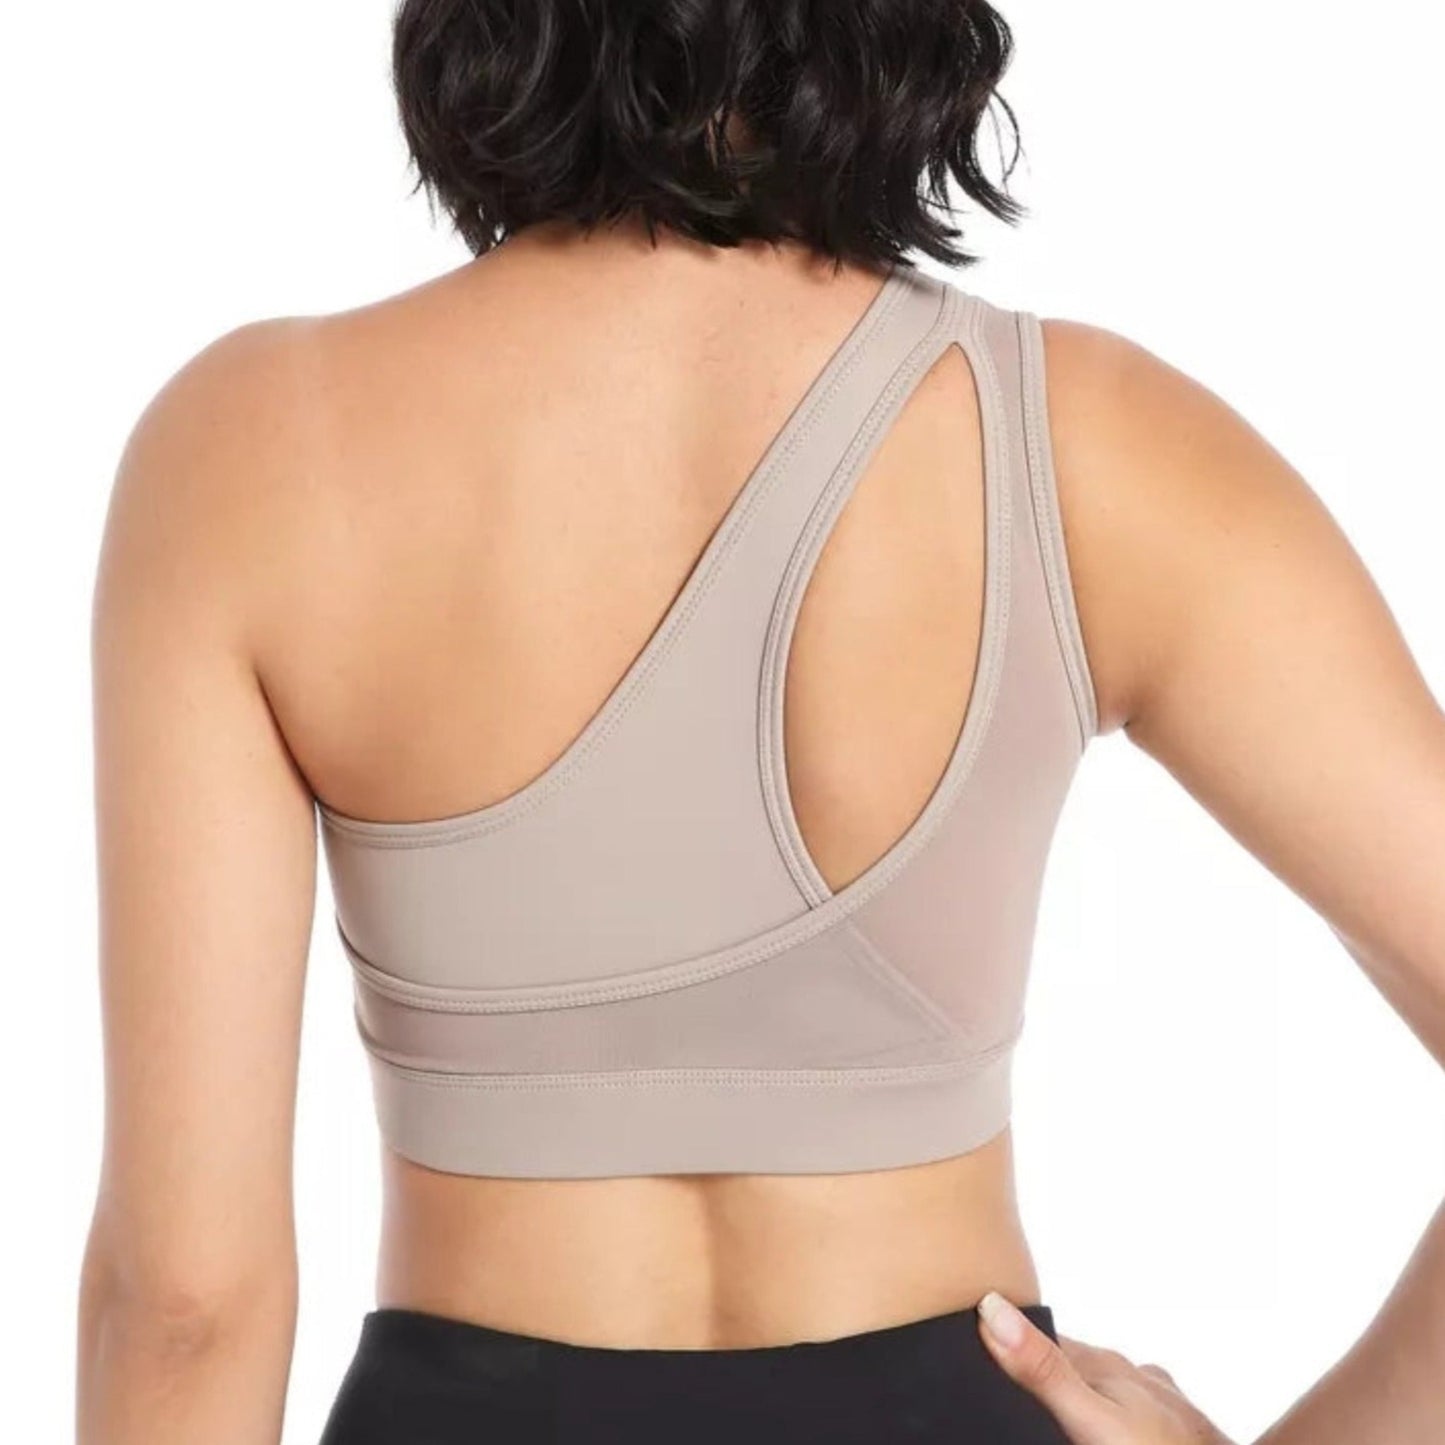 BACK SHOT OF FITNESS MODEL WEARING A ONE SHOULDER,  TAN, HIGH IMPACT SPORTS BRA FROM VIBRAS ACTIVEWEAR.